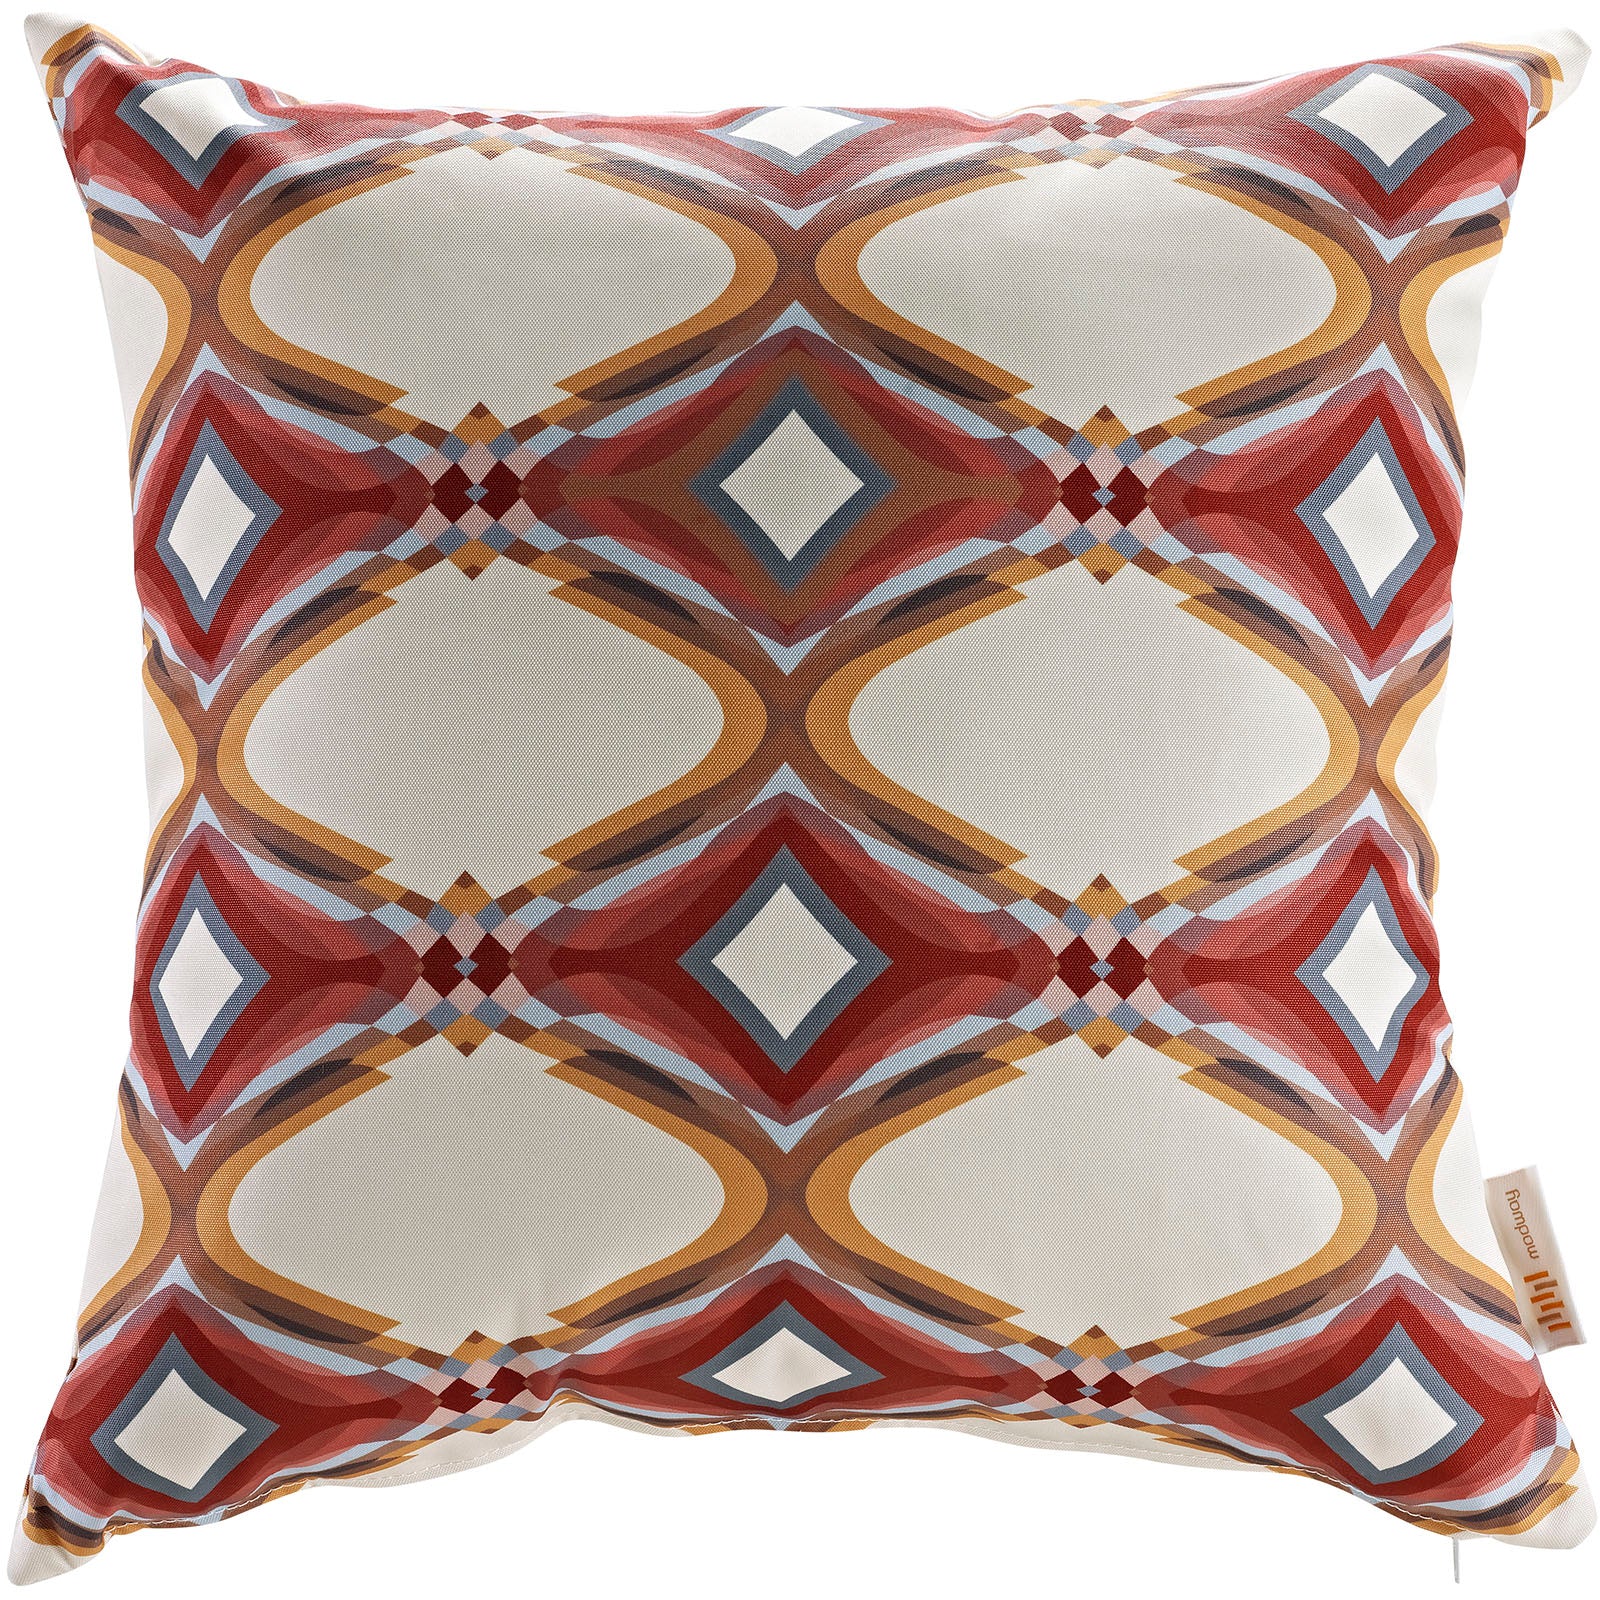 Modway Outdoor Pillows & Cushions - Modway Outdoor Patio Single Pillow Repeat